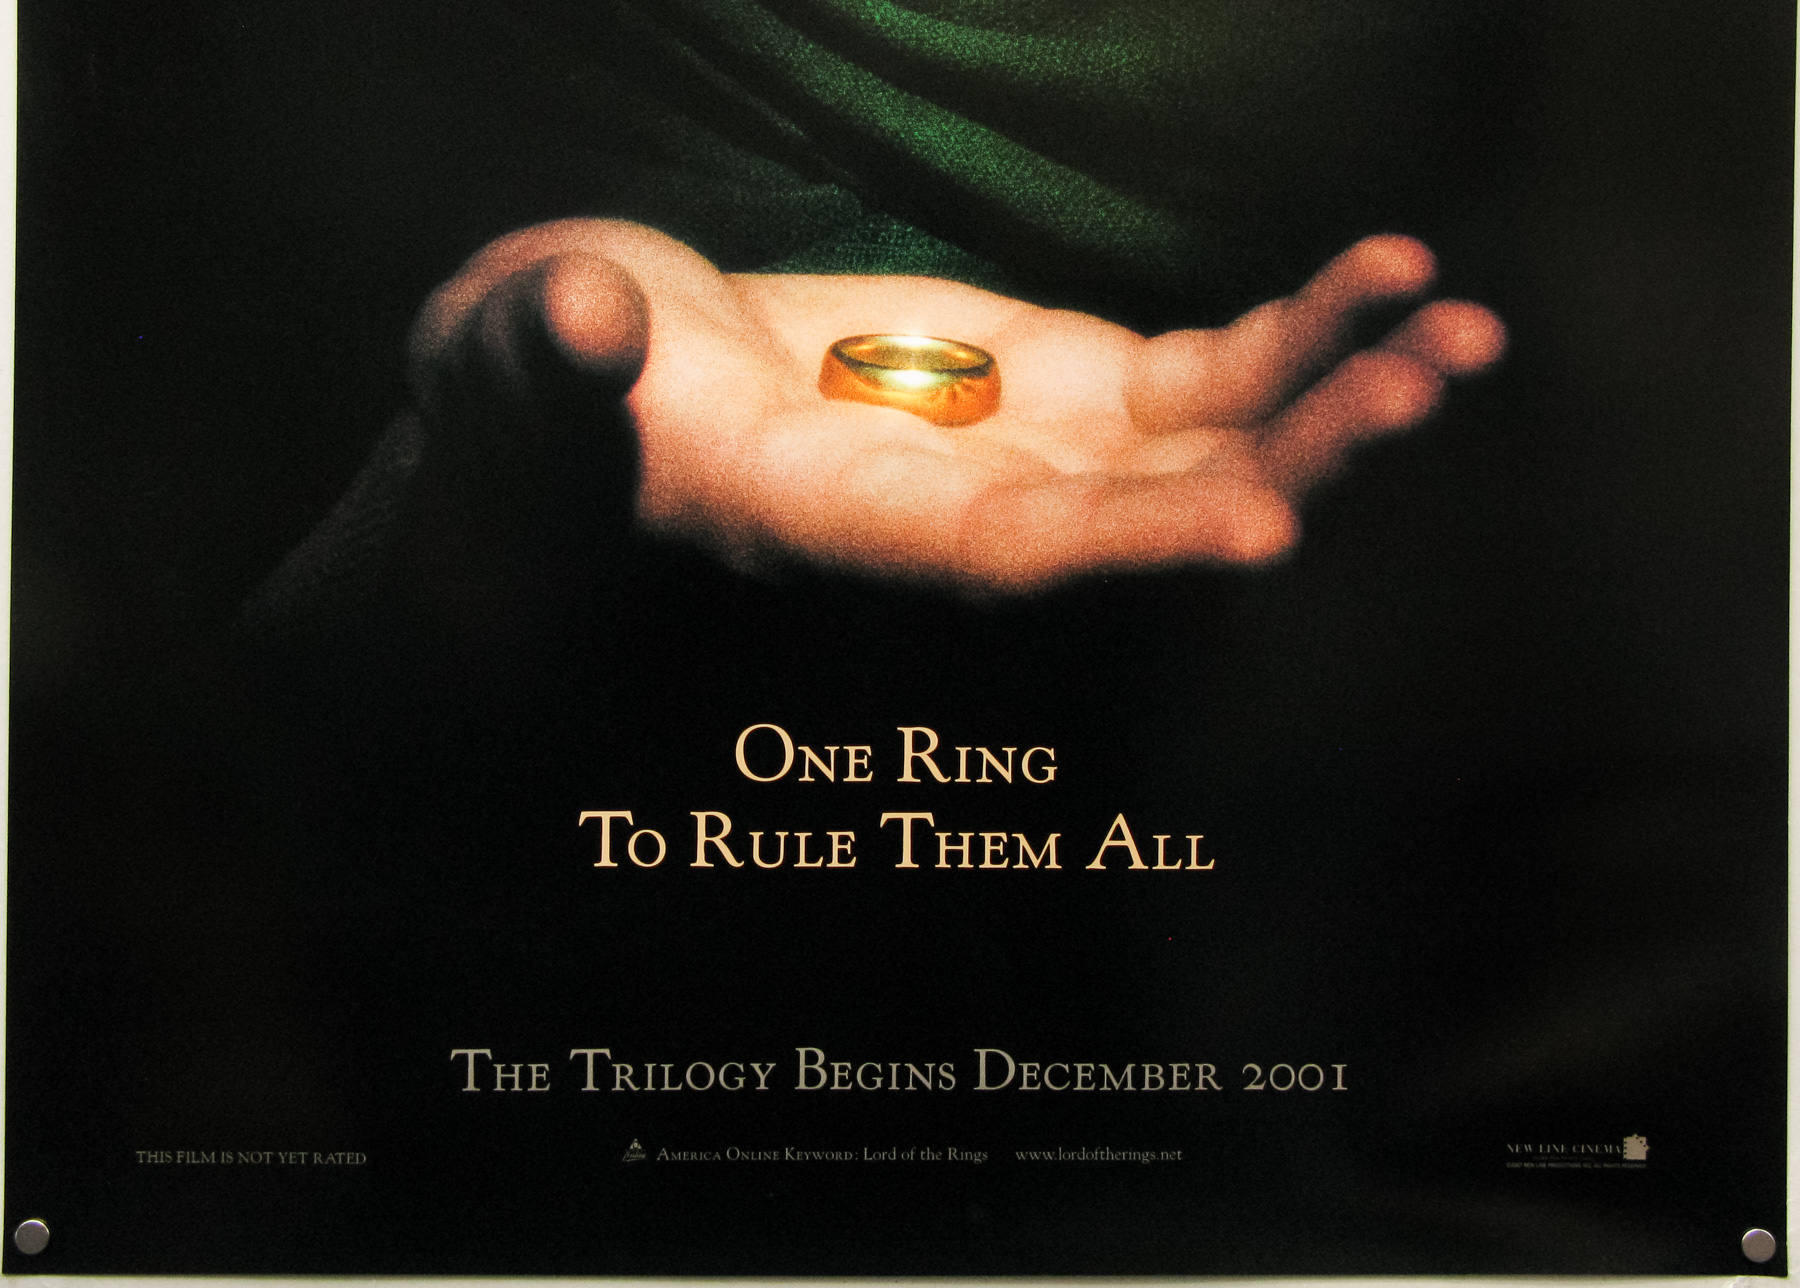 We need one Lord of the Rings game to rule them all